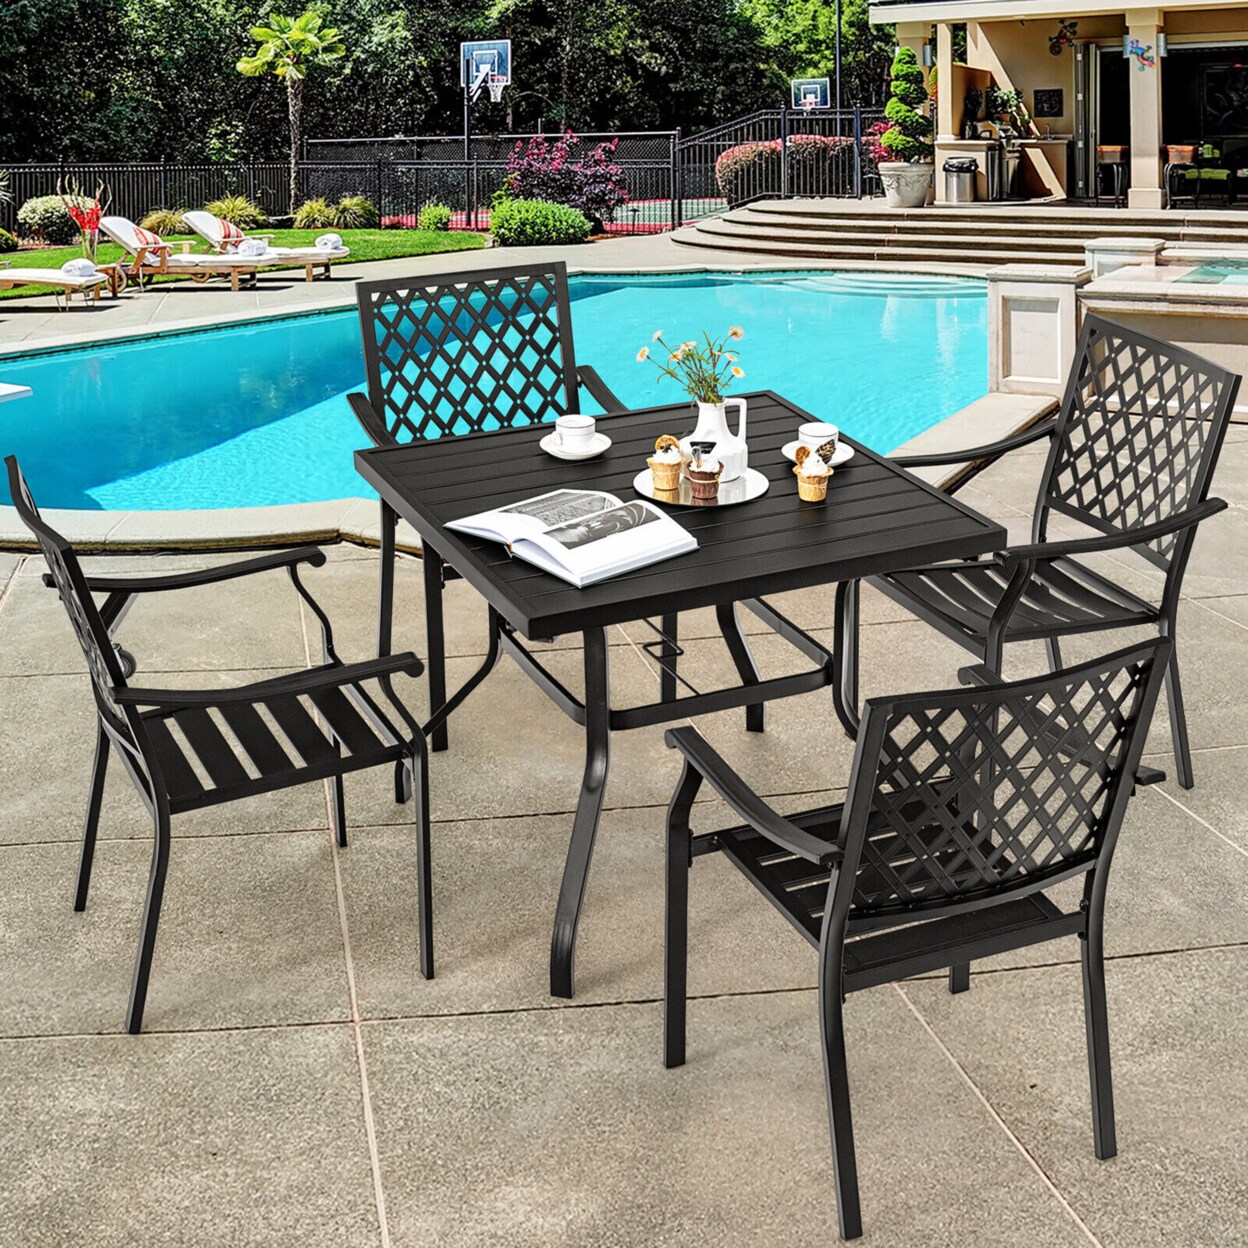 Gymax 5PCS Patio Dining Set Stackable Chairs and Table Set W/ Umbrella Hole